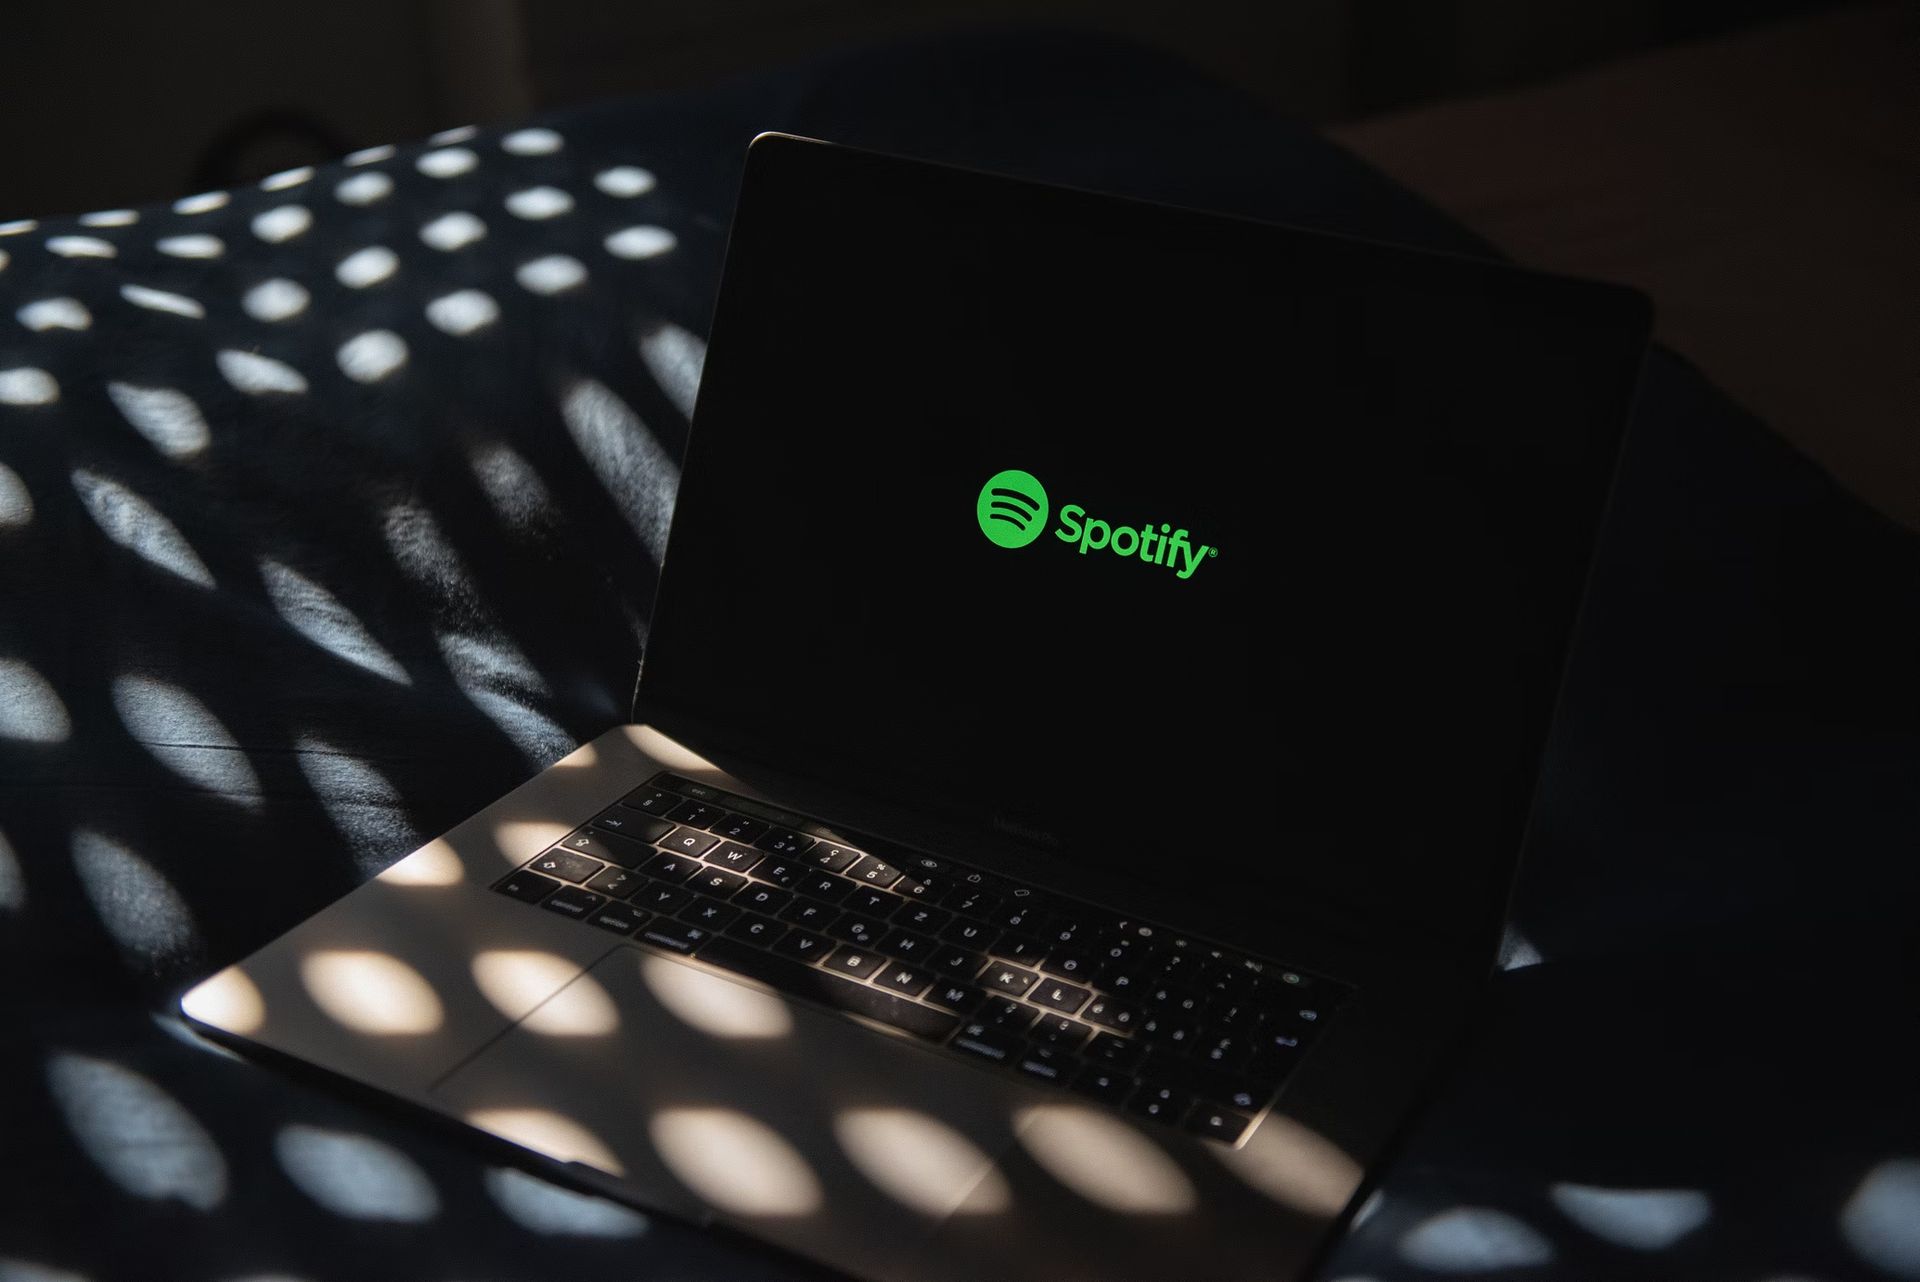 In this post we are going to explain what Spotify presale is and how to find and get codes!